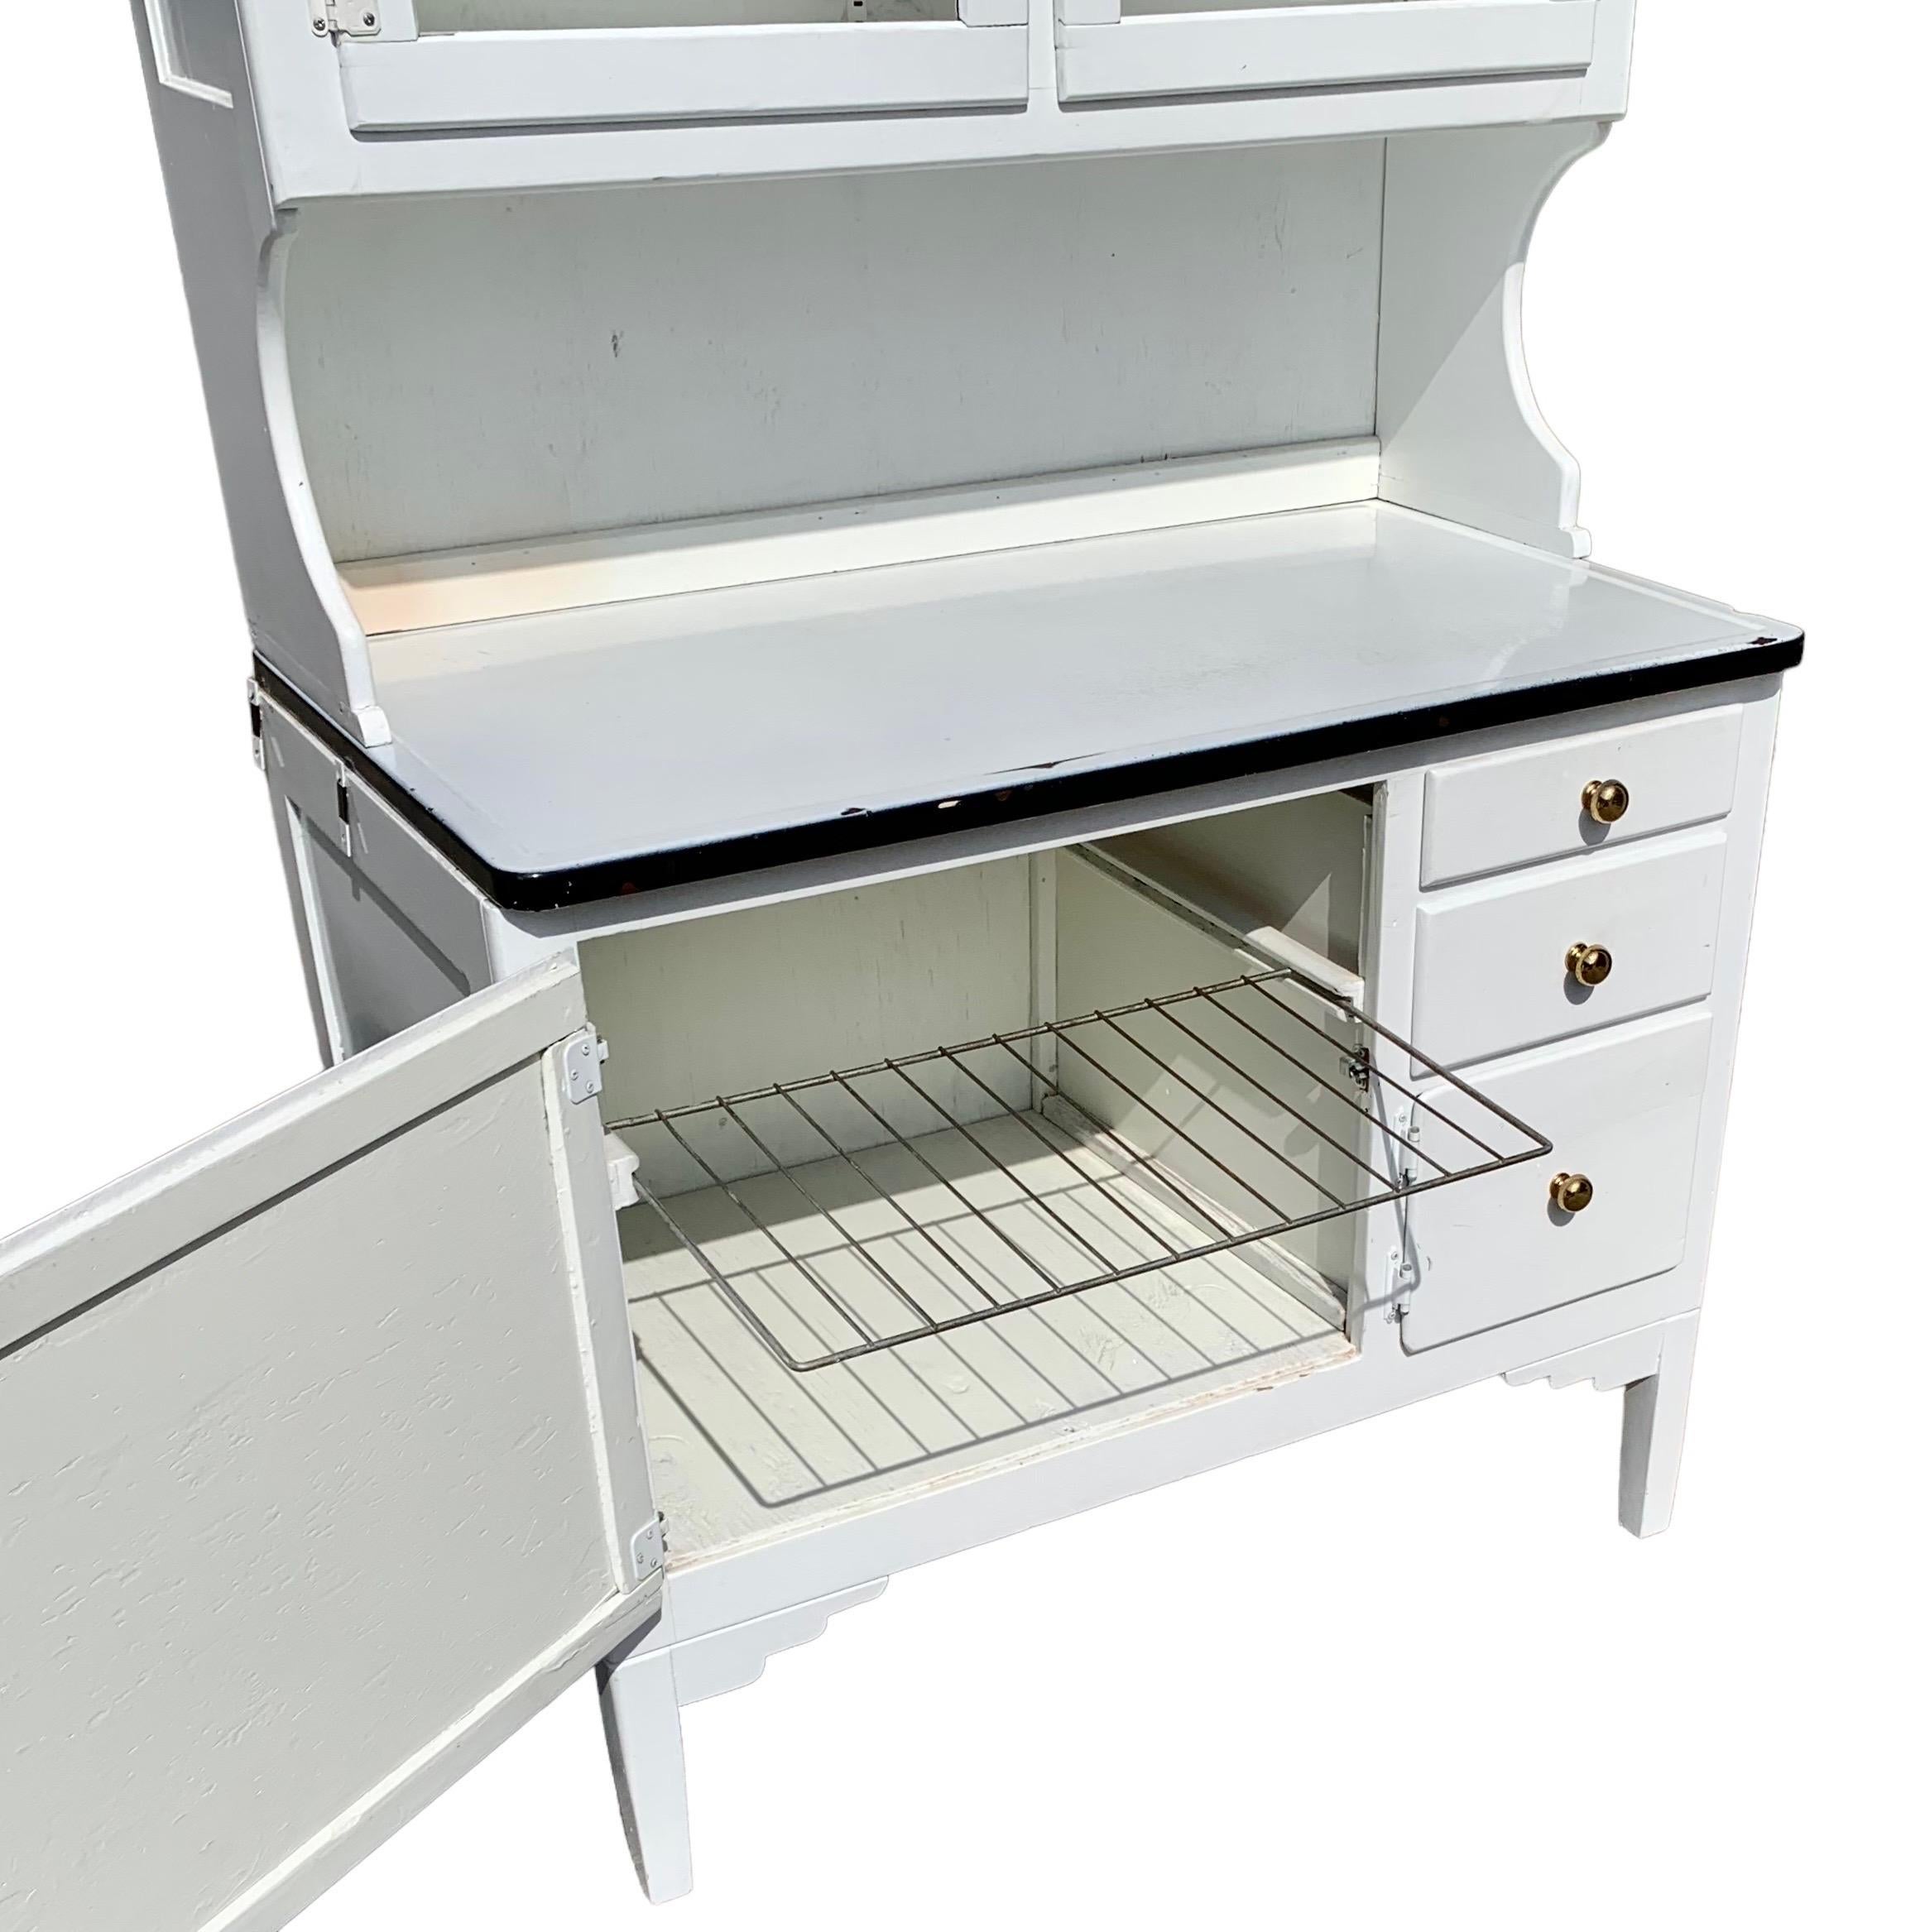 An American Art Deco, white painted hardwood and porcelain Hoosier cabinet having two glass doors and a shelf above a porcelain work surface, above a door with pull out, metal cooling grill, two drawers, and one small door. 

A very useful piece,